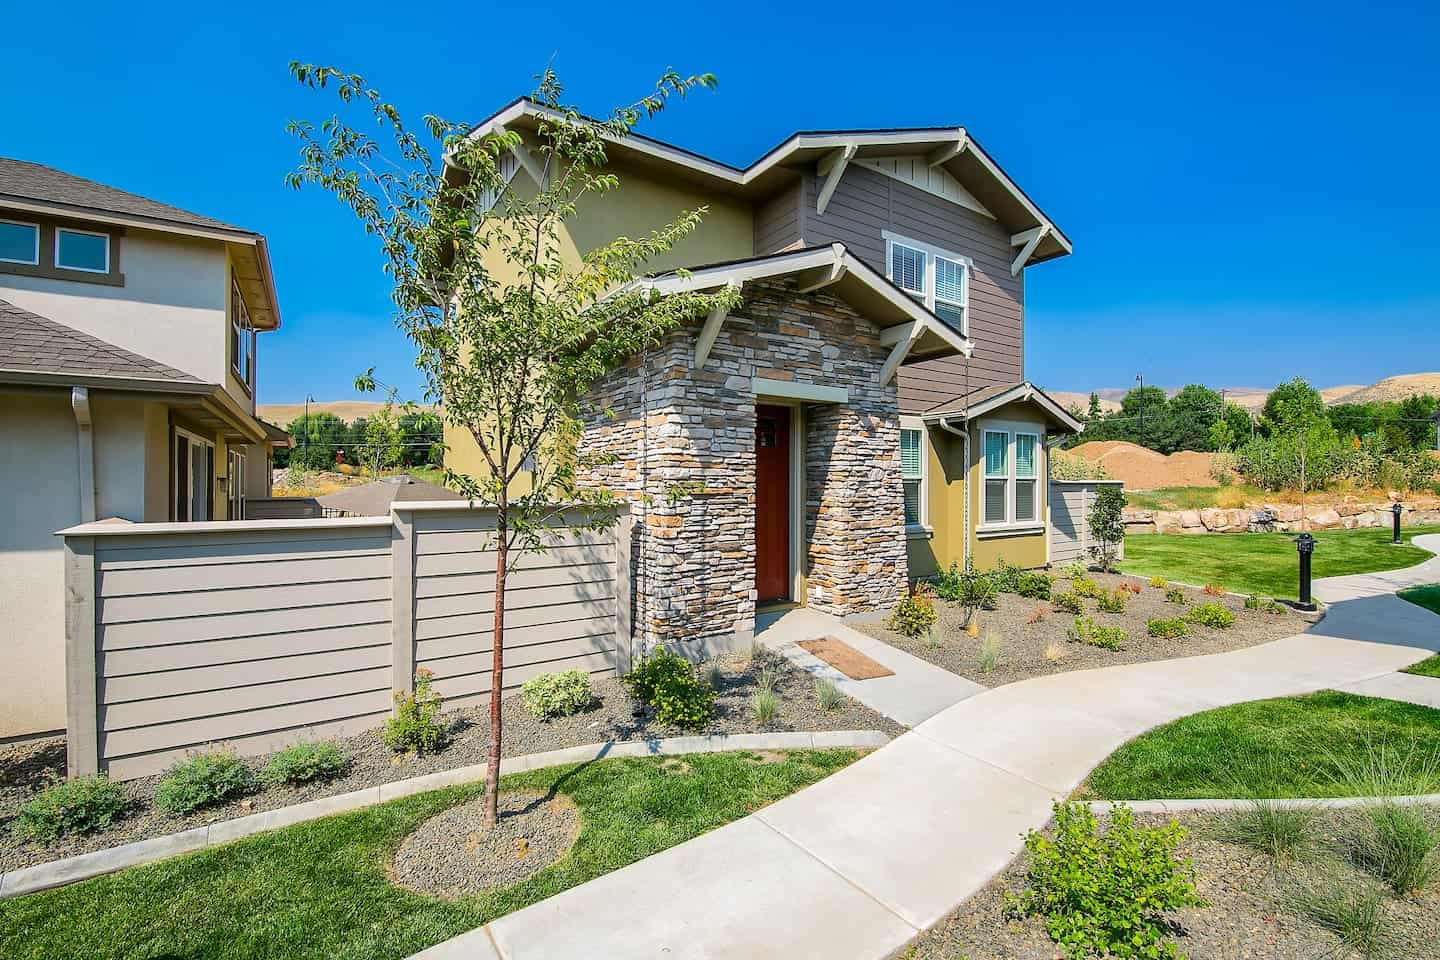 Check out this fantastic budget Airbnb near Boise